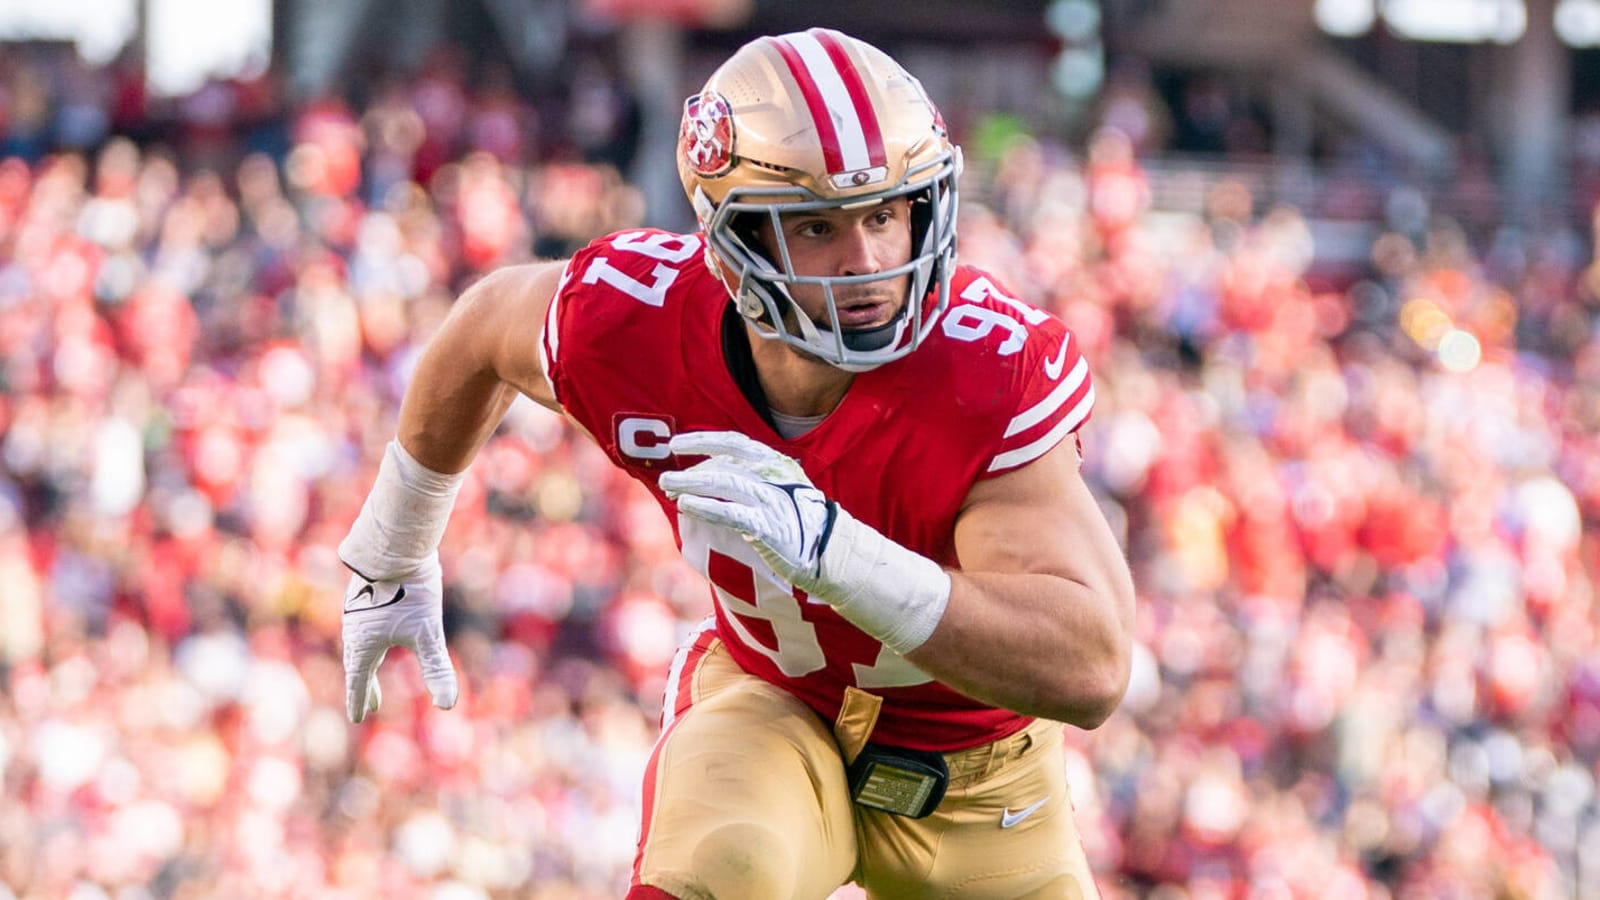 NFL Network host blasts 49ers over Nick Bosa situation